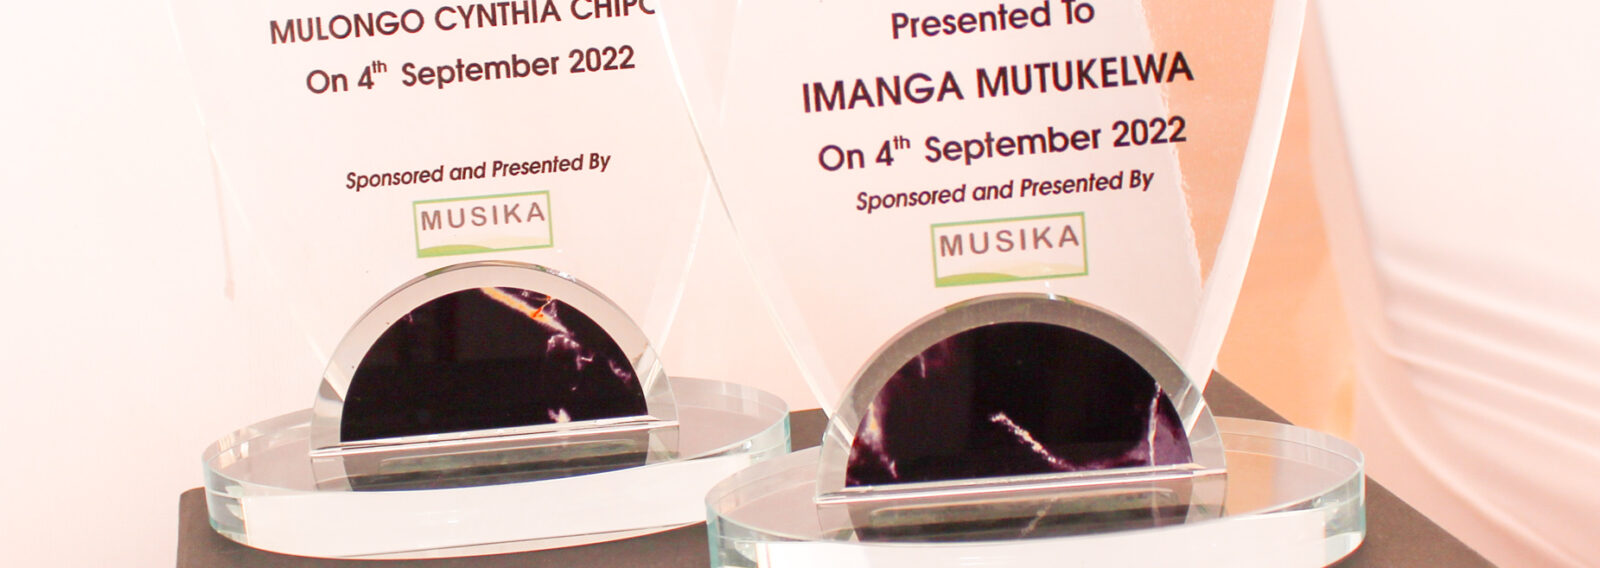 Musika demonstrates support to education by sponsoring Best Student award at Rusungu